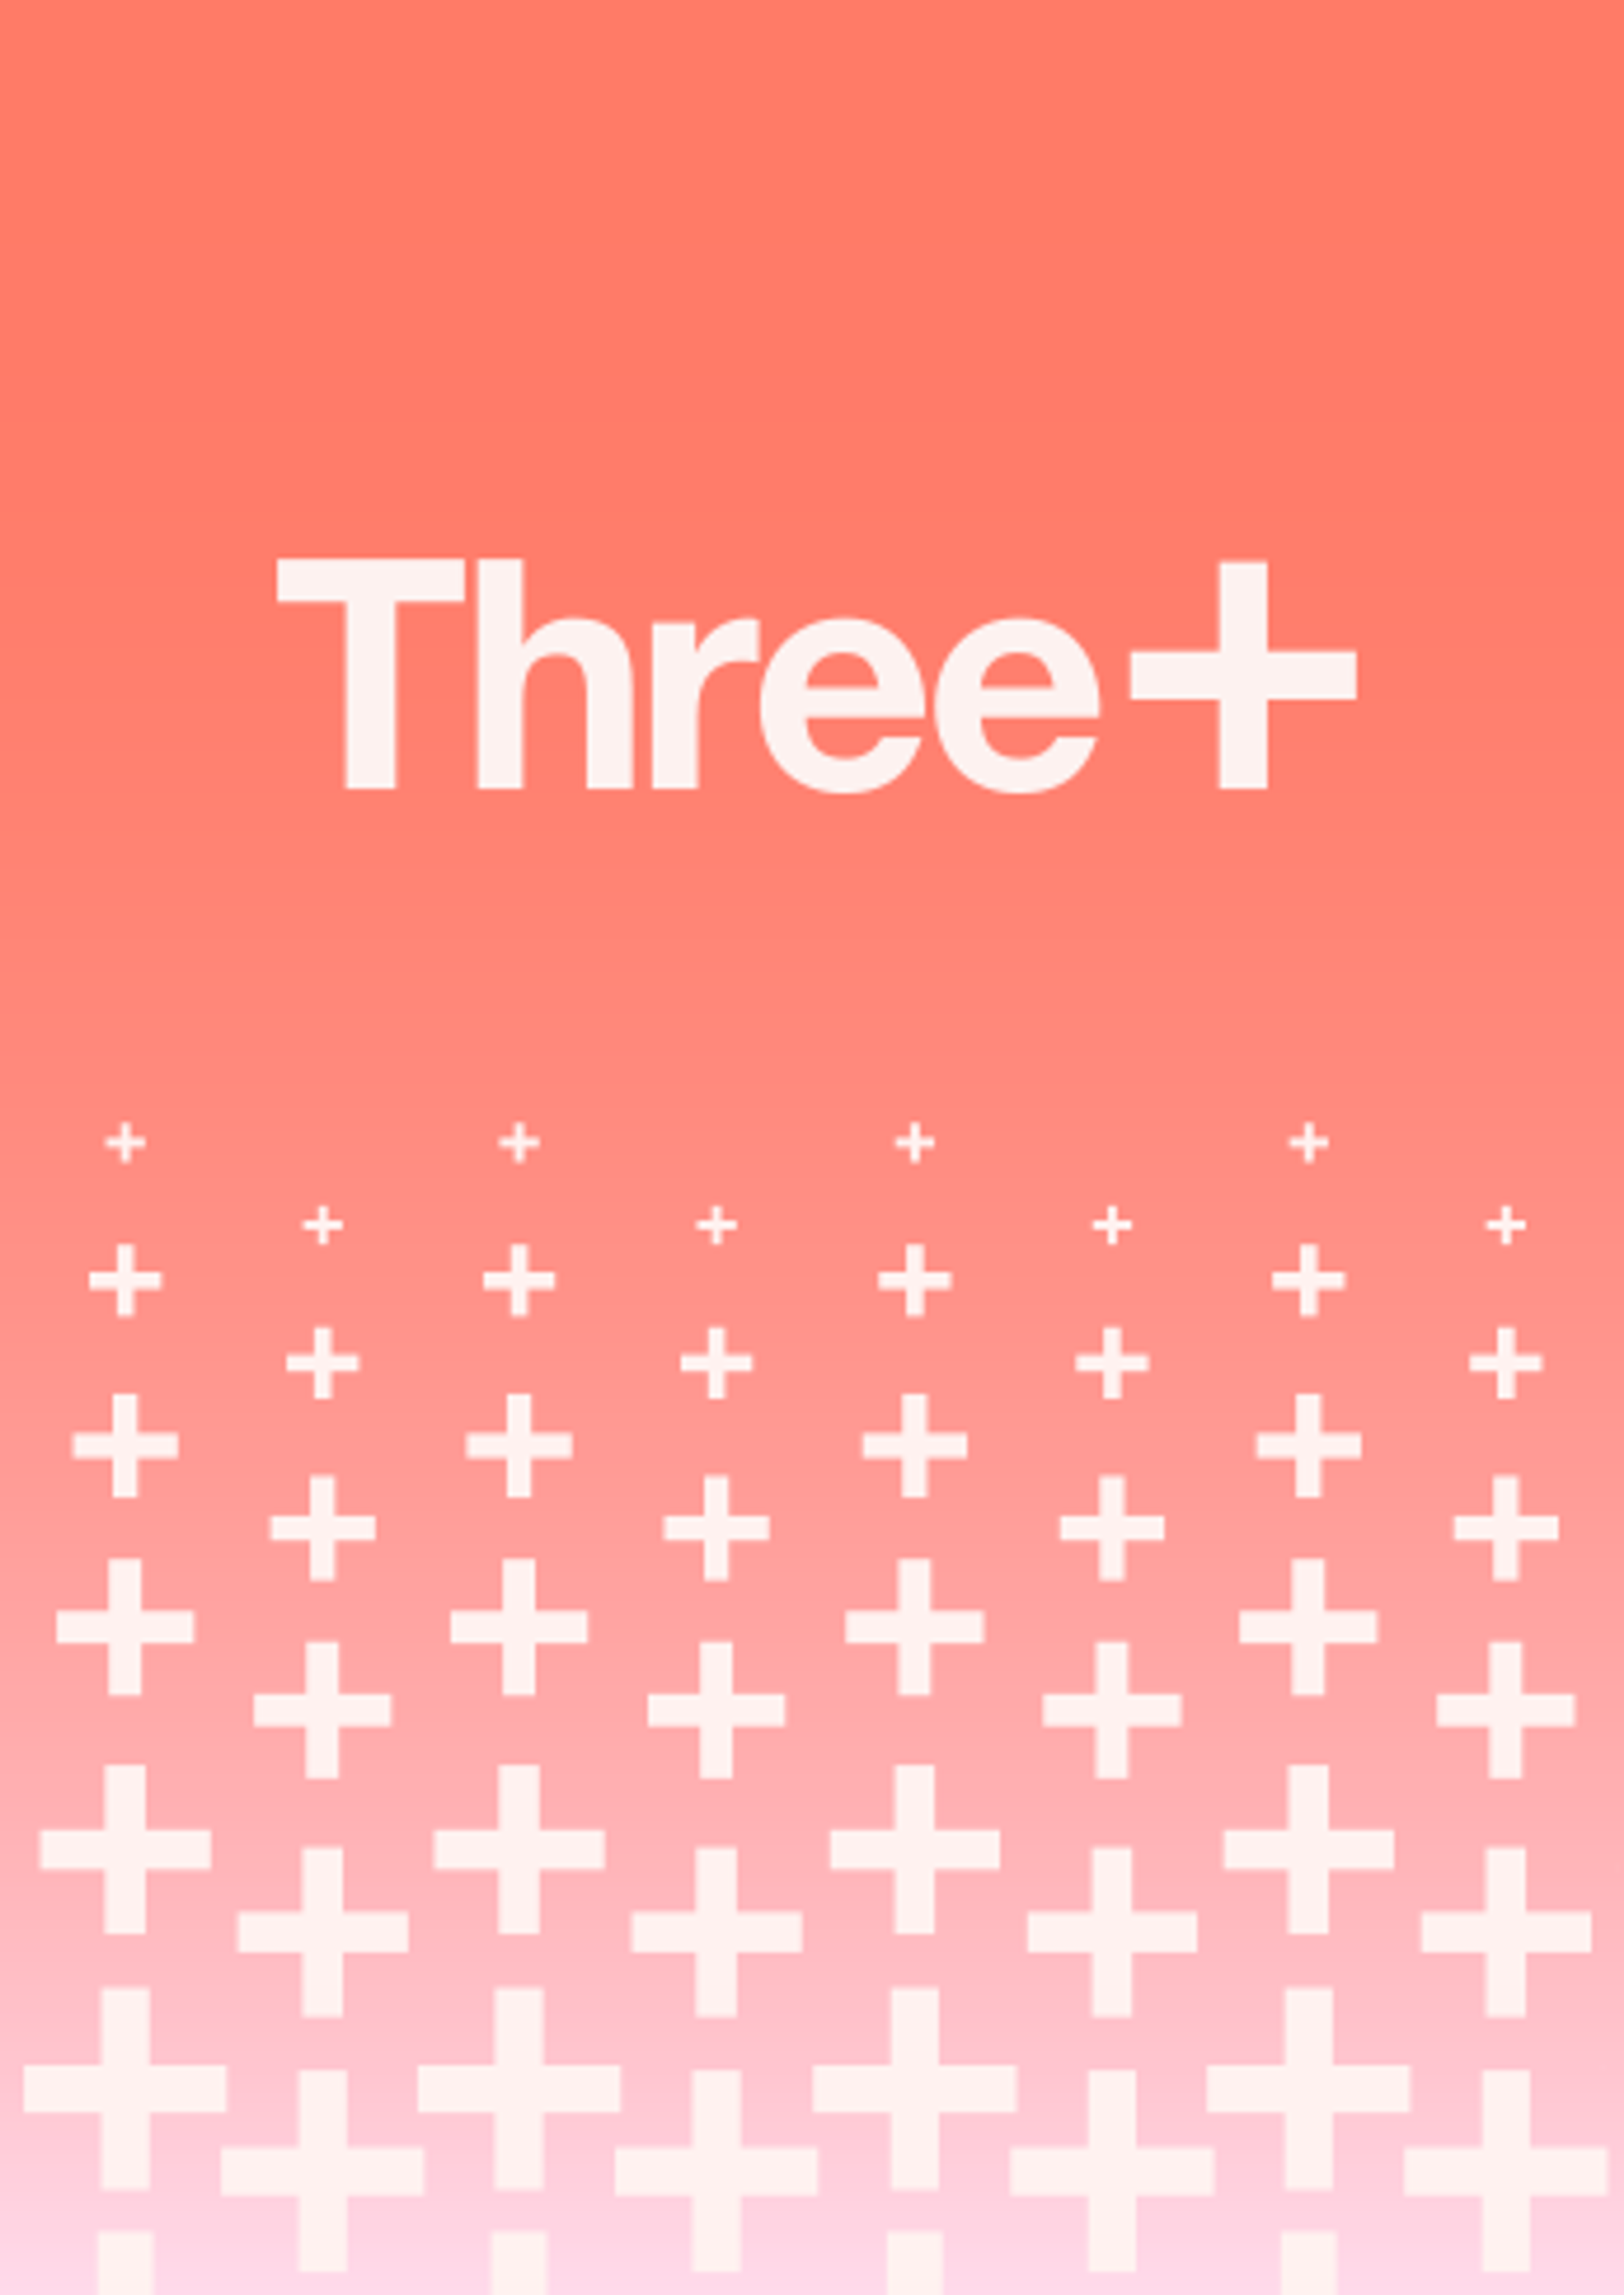 Three+ logo with aurora background, and multiple plusses in white